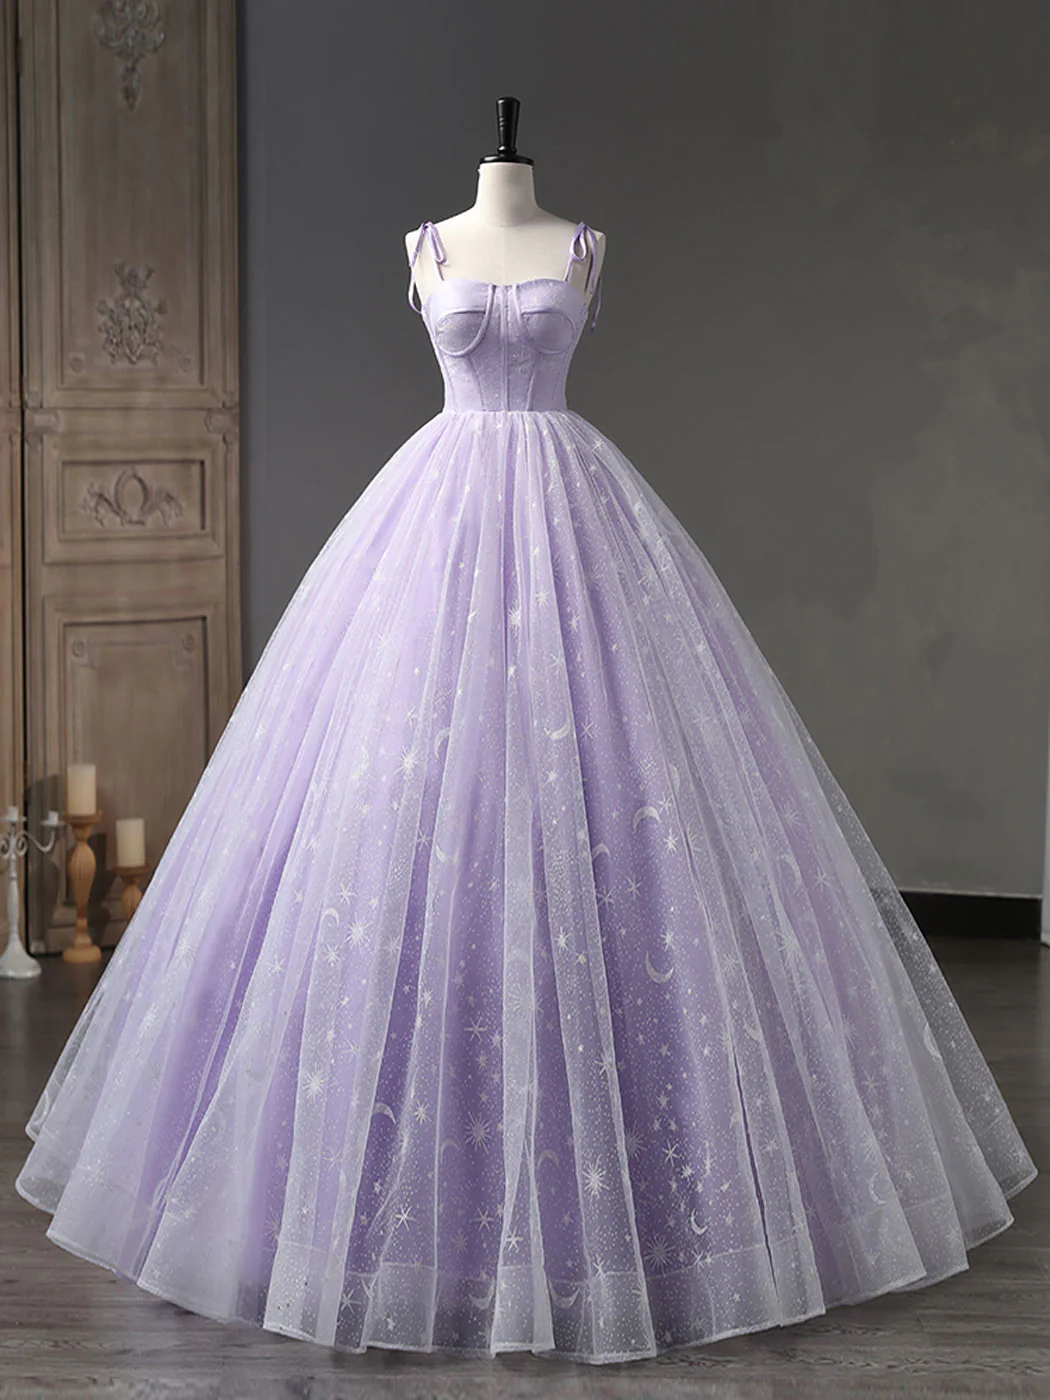 Star and Moon Fantasy Tulle A-Line Long Evening Dress, Blue Formal Sweet 16 Prom Dress Quinceanera Dress SH1063